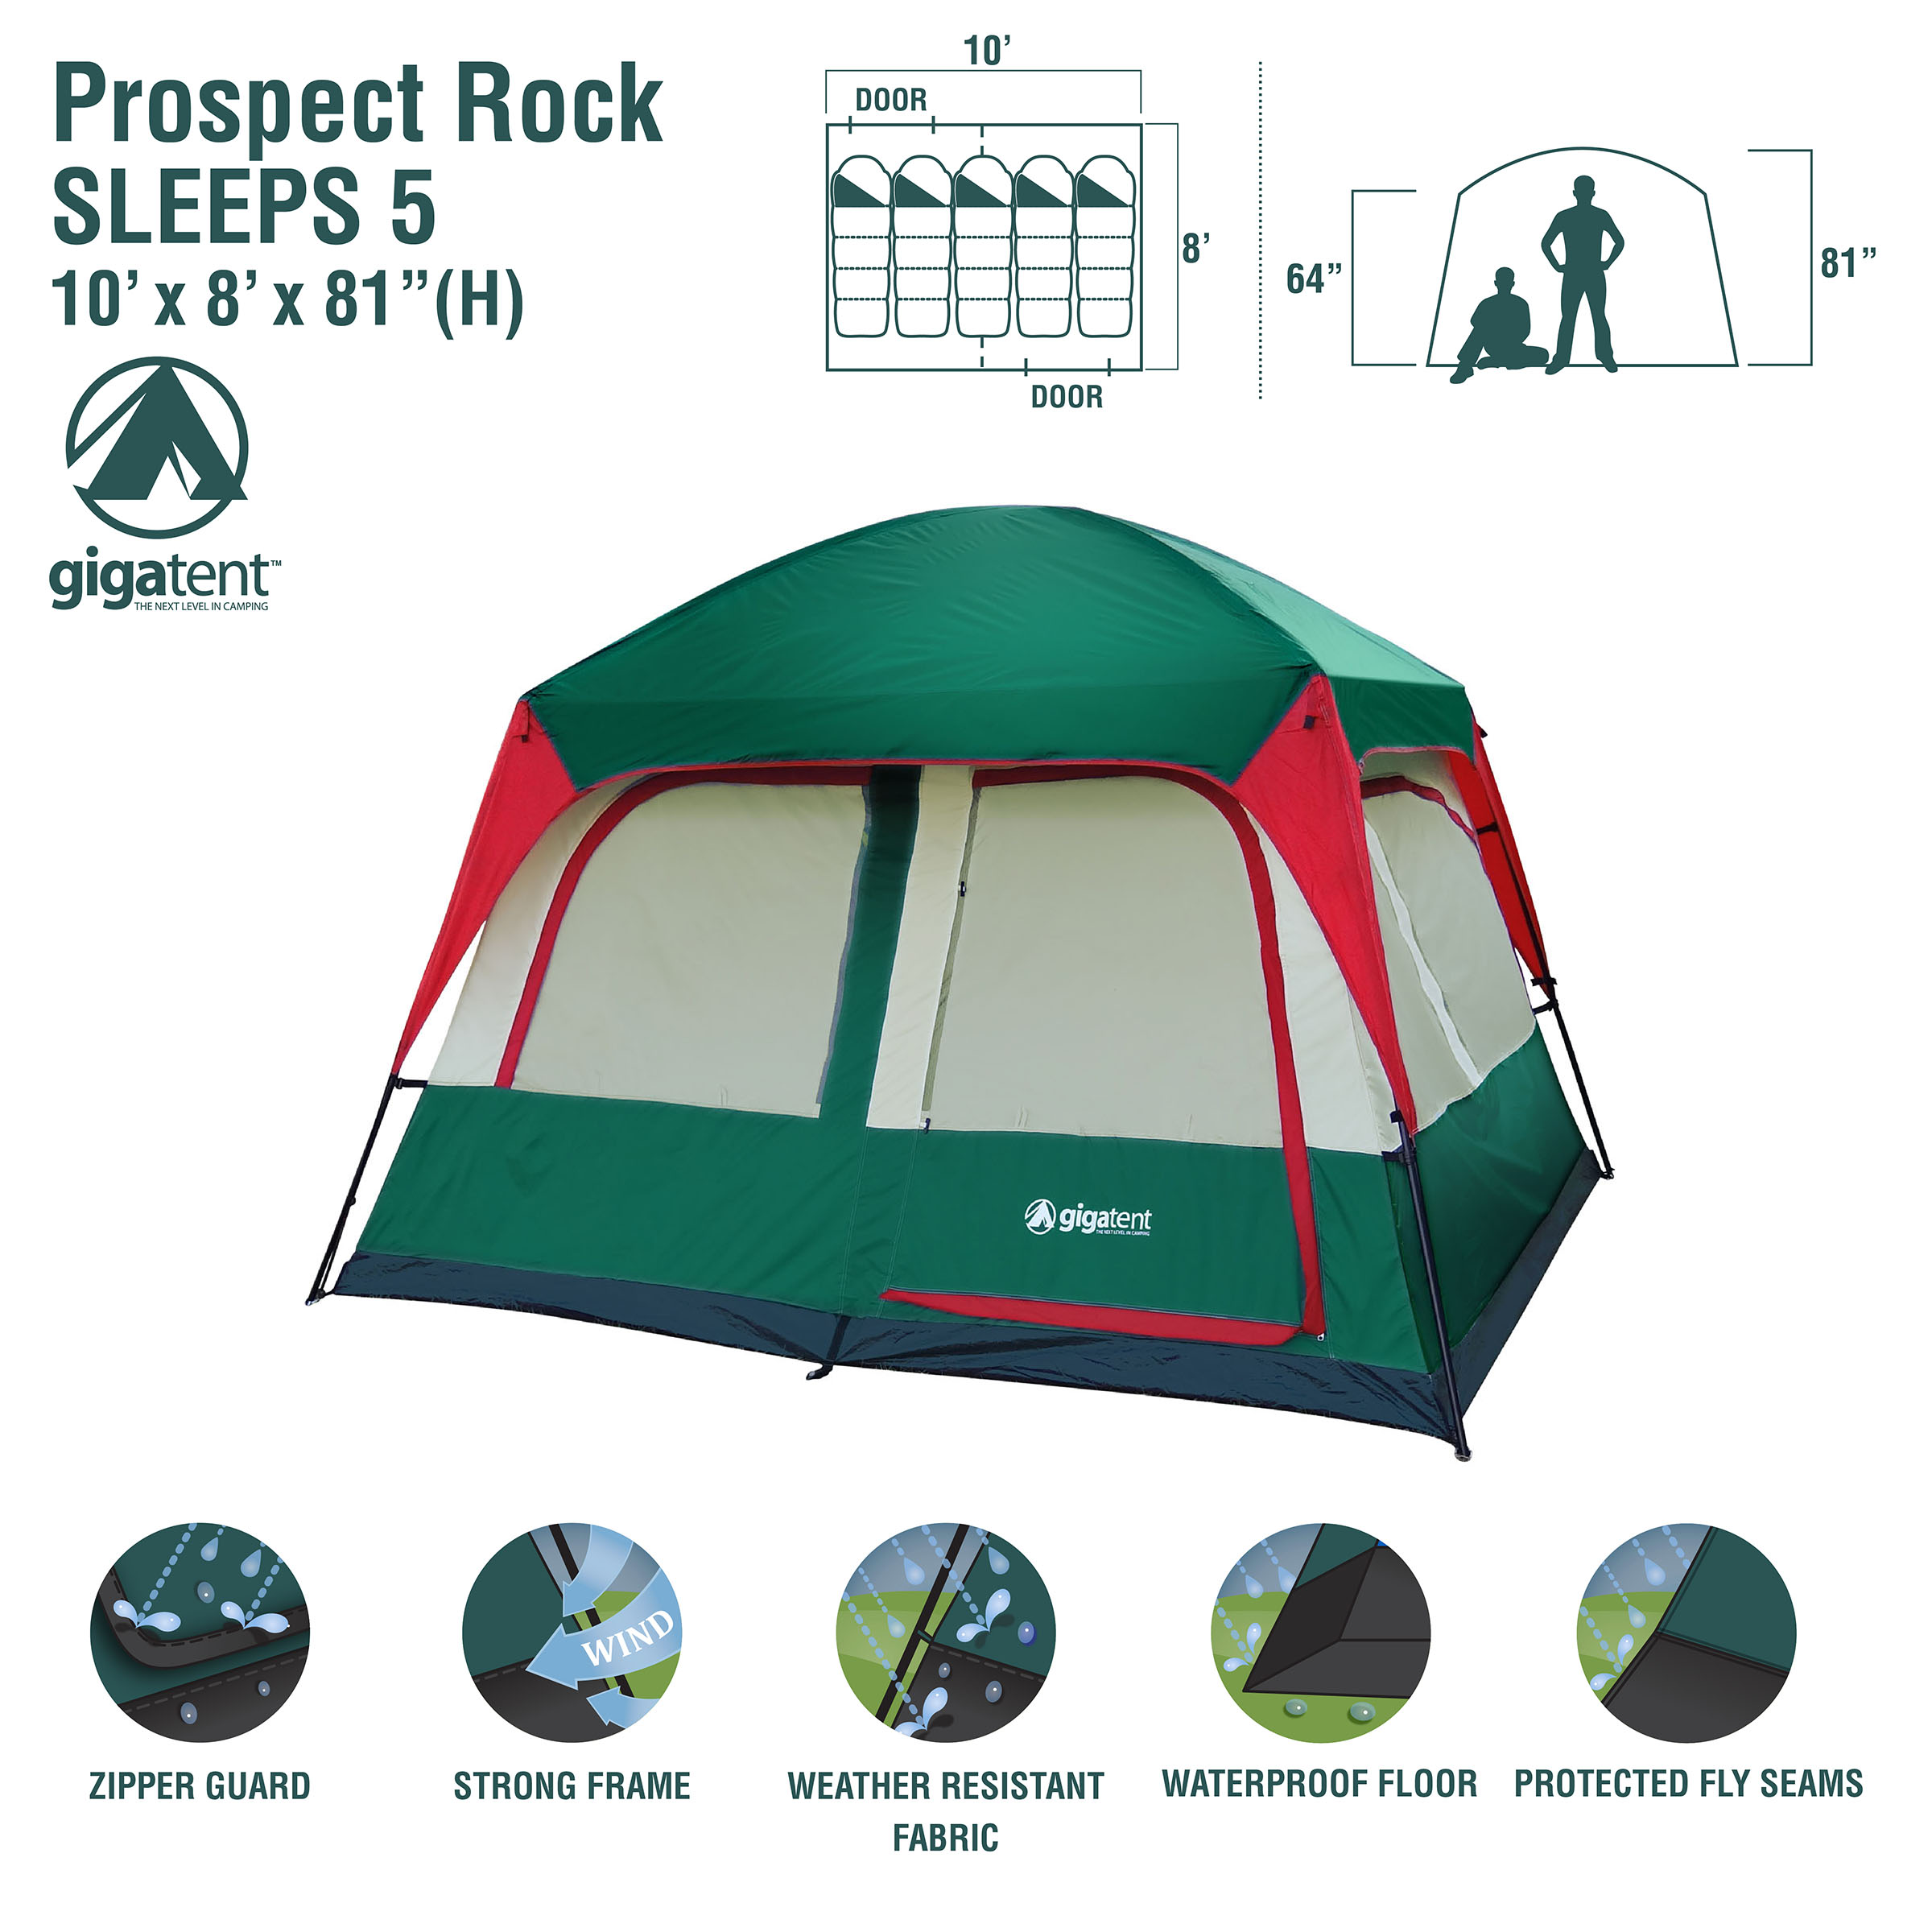 Gigatent Prospect Rock 4-5 Person Family Camping Tent - image 5 of 5